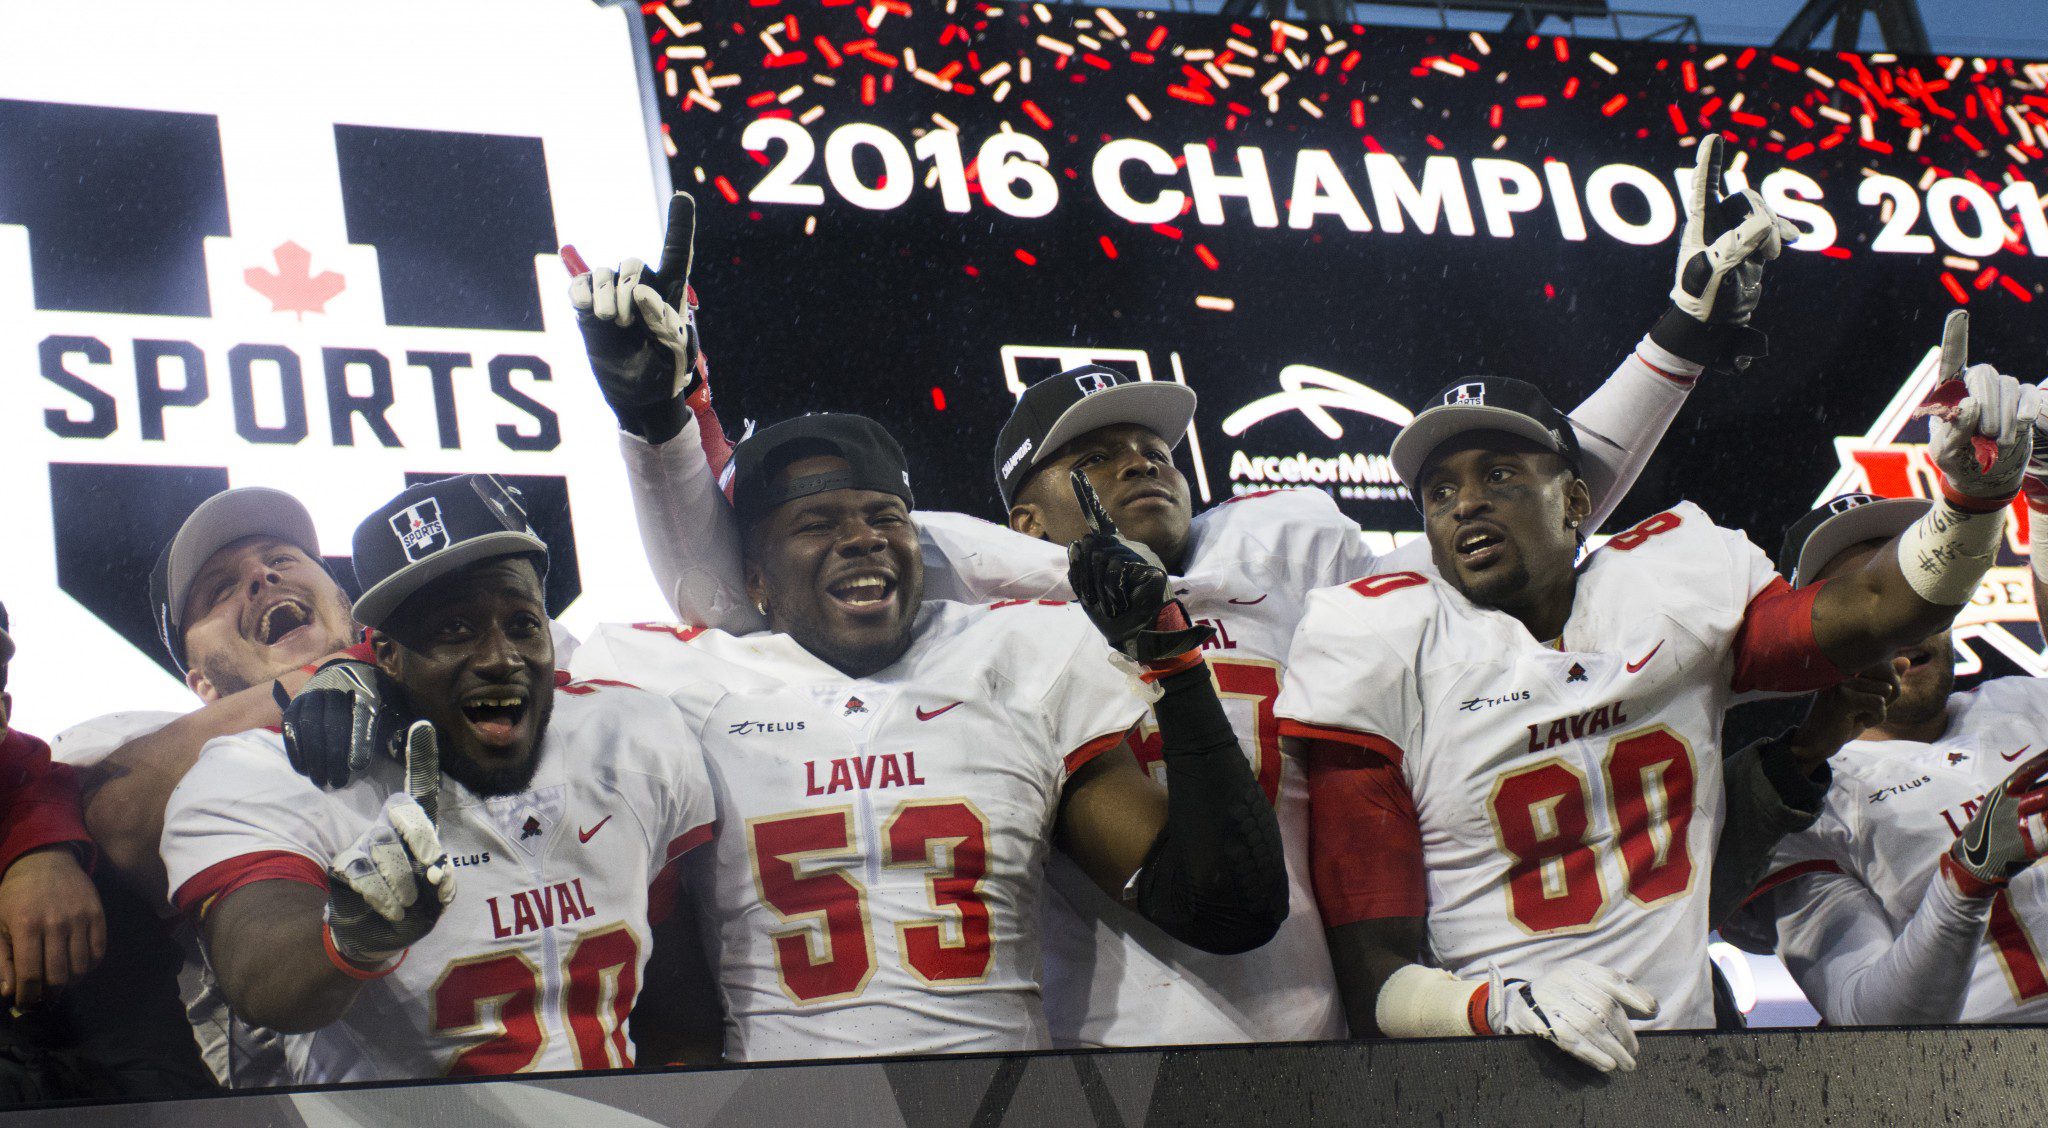 Canadian University football An exciting product with an uncertain